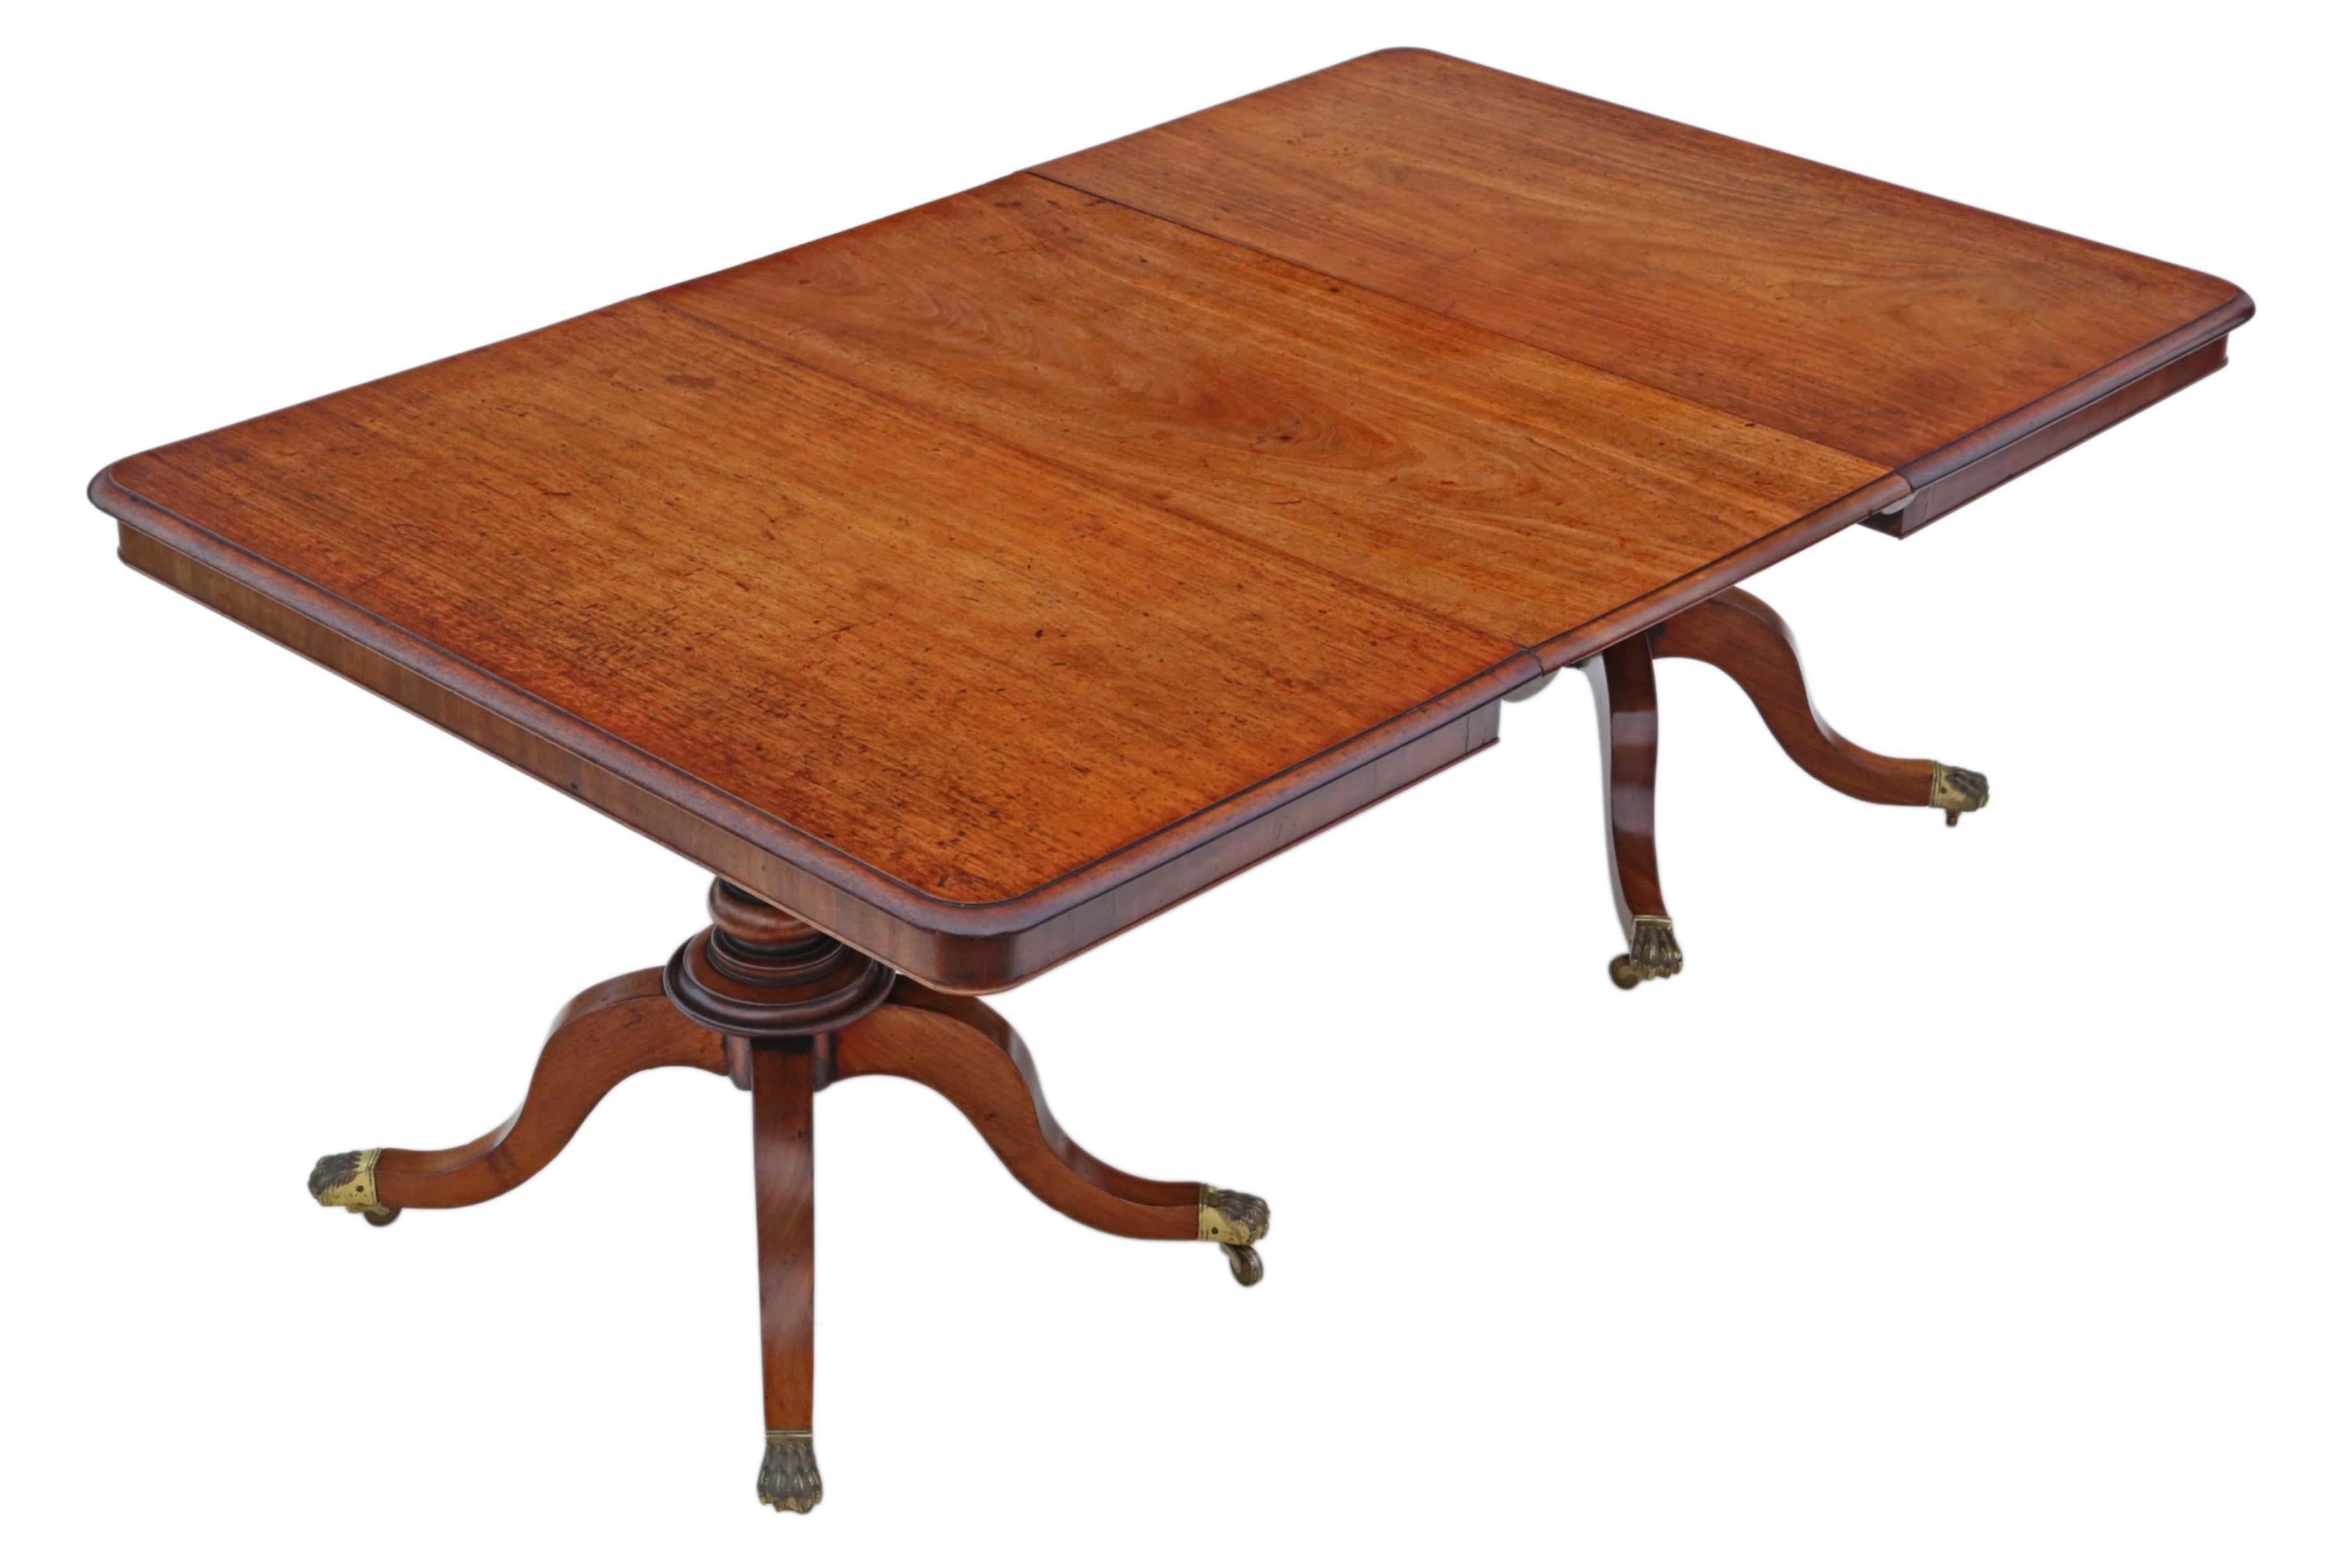 Antique large fine quality mahogany extending twin pedestal extending dining table early 19th Century.

The table has a lovely colour and stands on quality brass castors. The finishes are in good order, with historic knocks, marks and